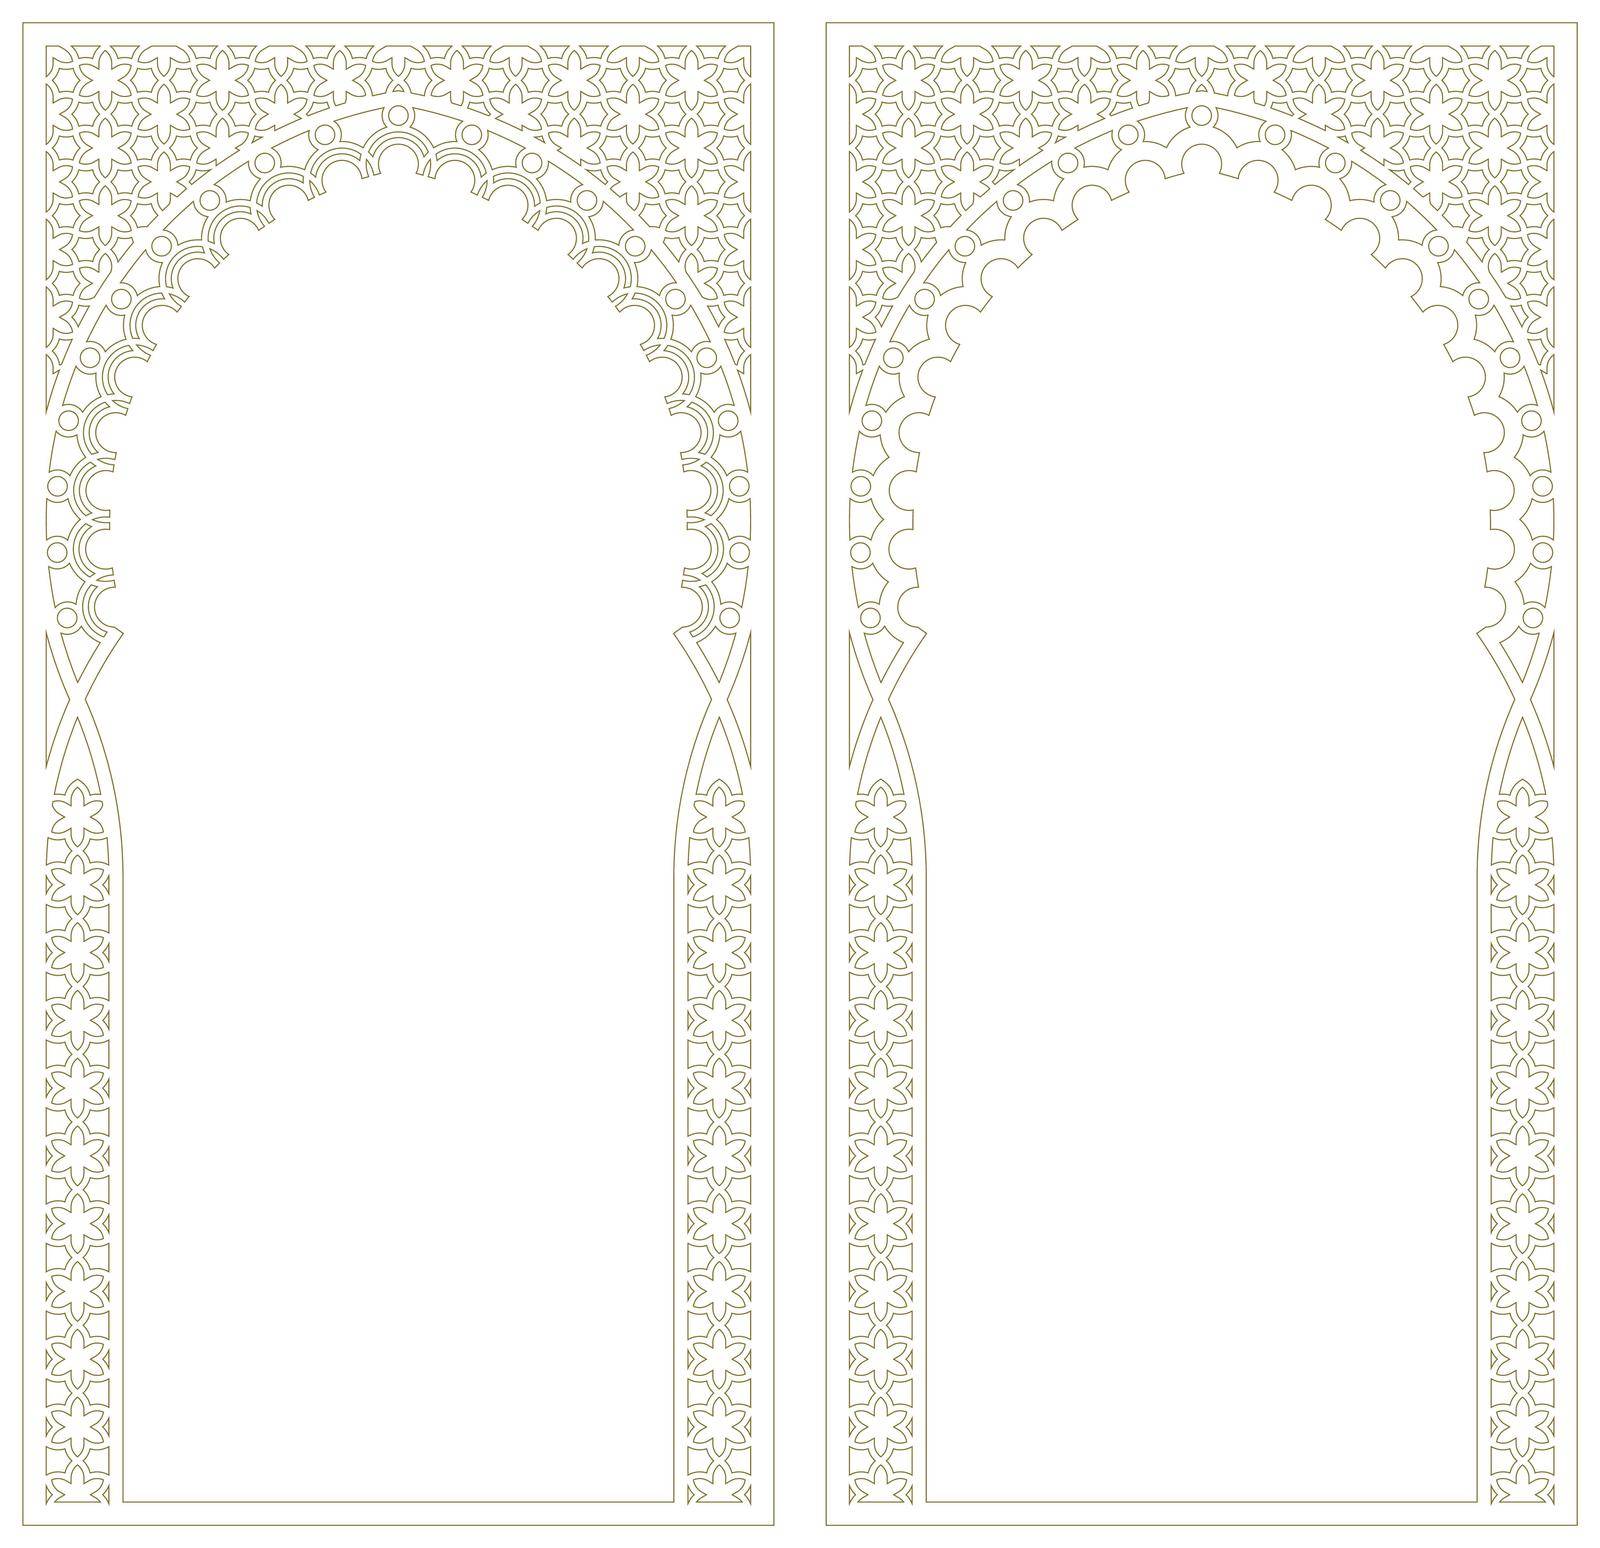 Rectangular frame of the Arabic pattern.Curly frame. by ALYOHA